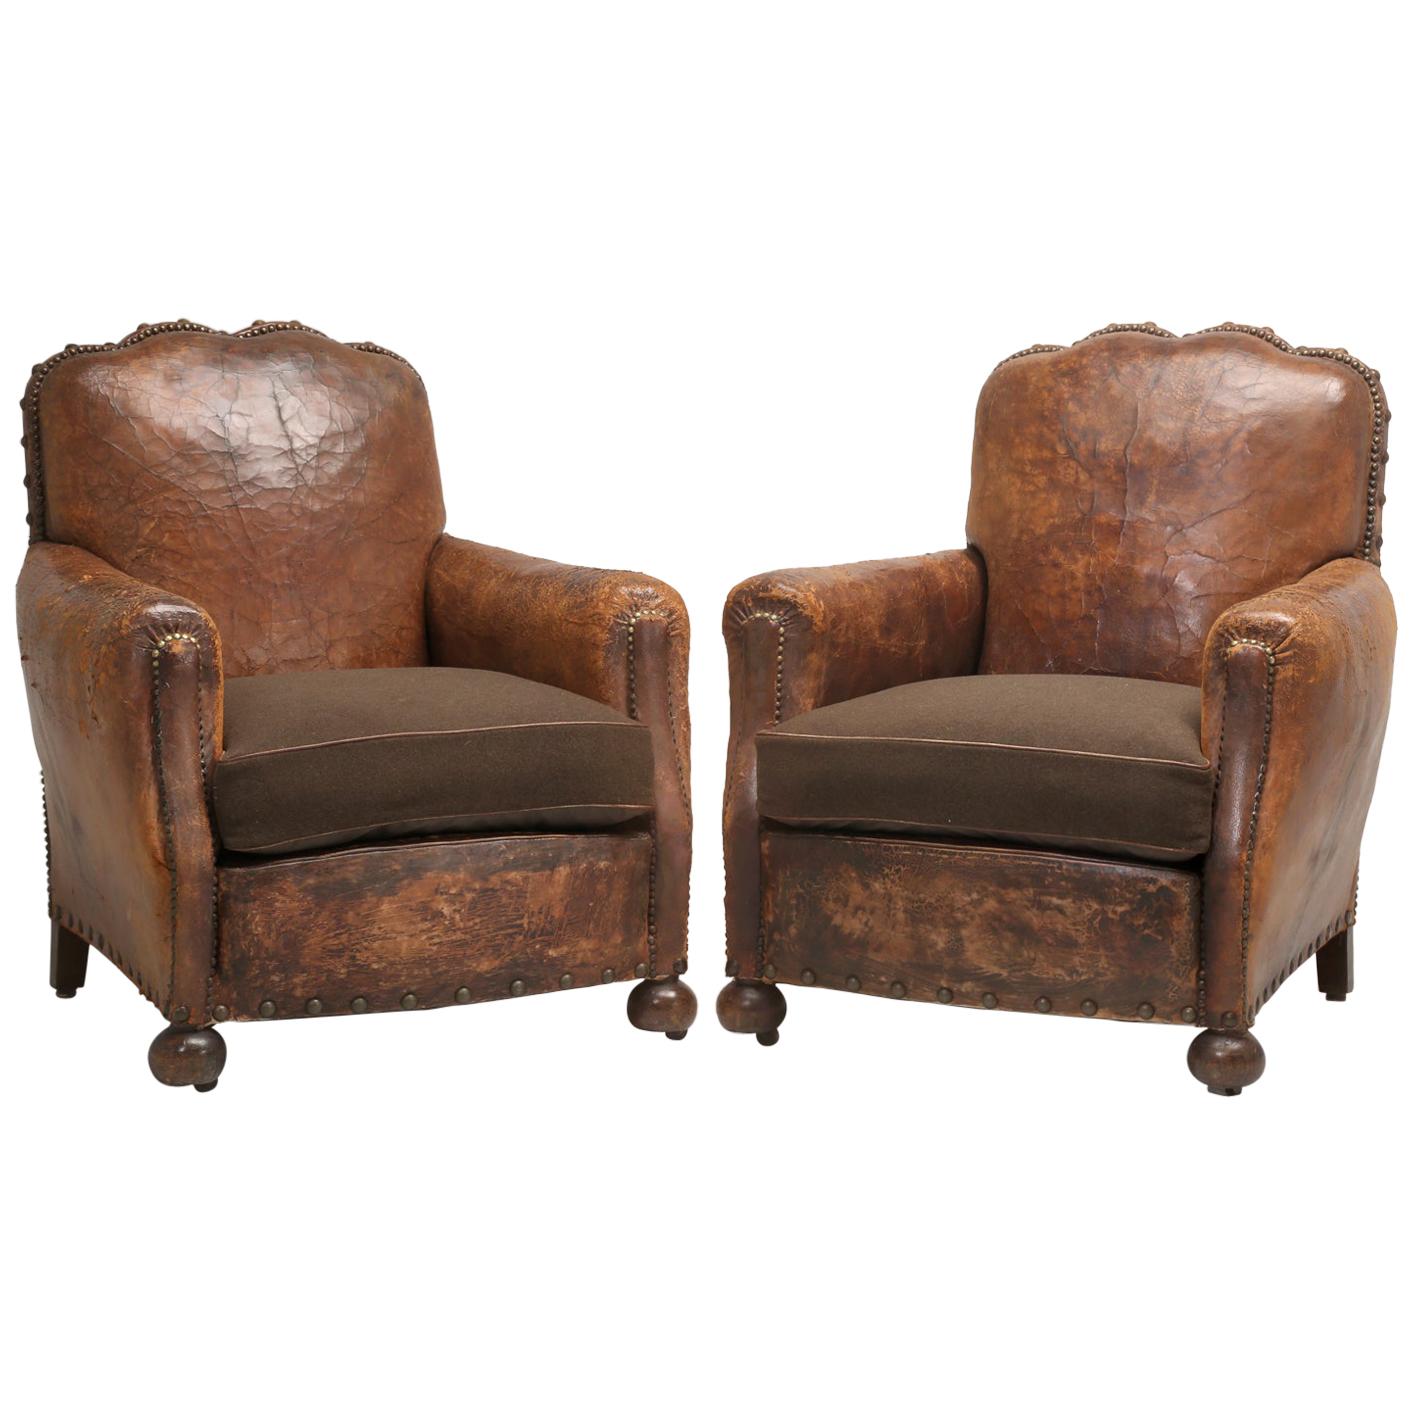 Antique Pair of French Leather Club Chairs from the 1920s Extensively Restored